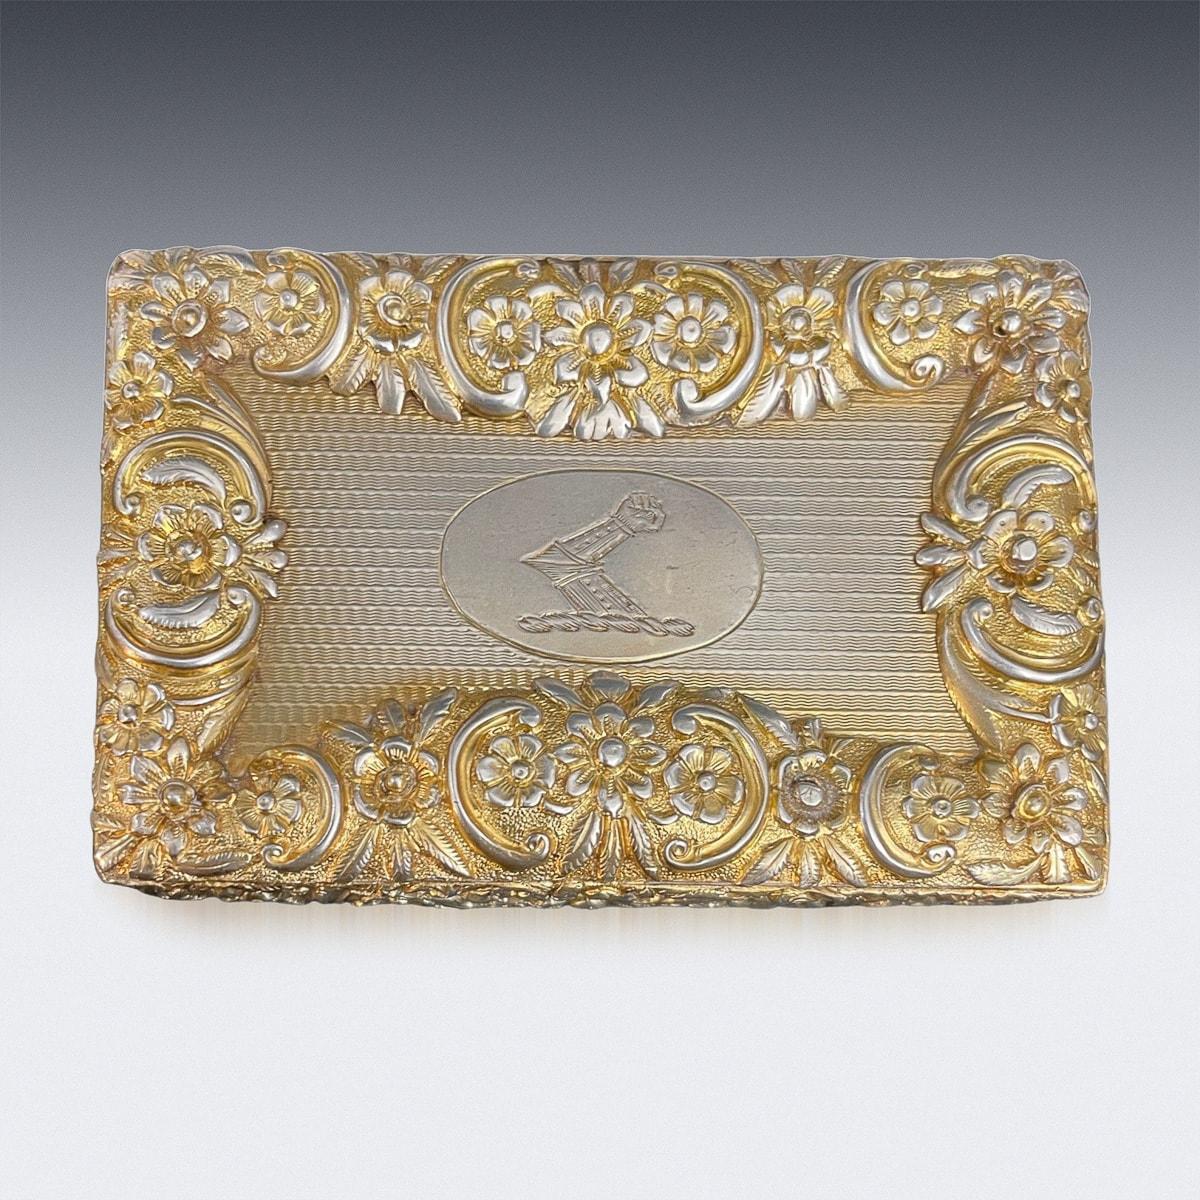 Antique 19th Century Regency solid silver table snuff box, particularly large size, of rectangular form, the cushioned sides are beautifully chased with a floral decoration in relief, the cover applied with cast scrolls and floral border and scroll